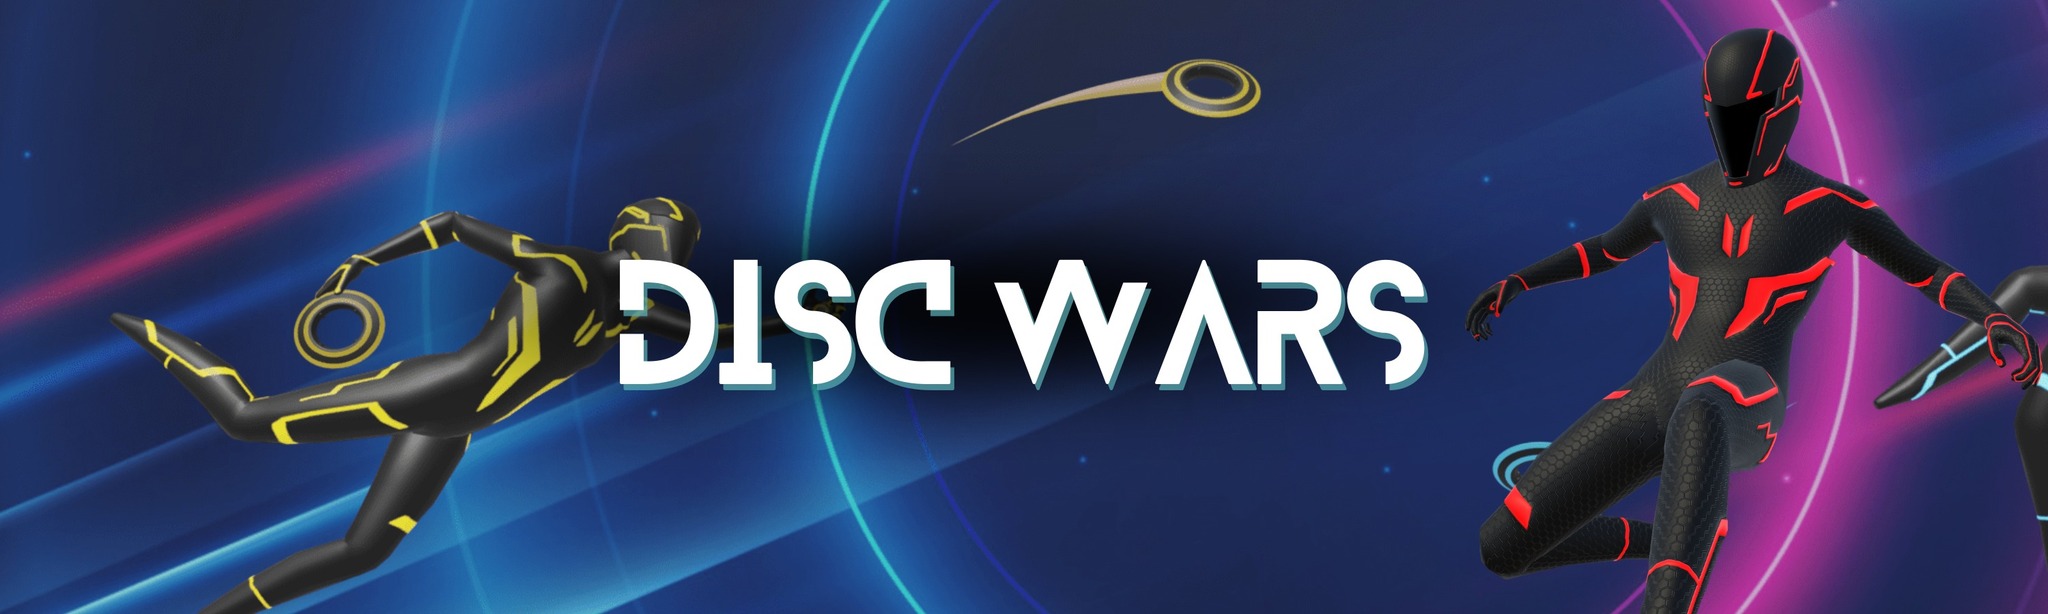 The disc wars